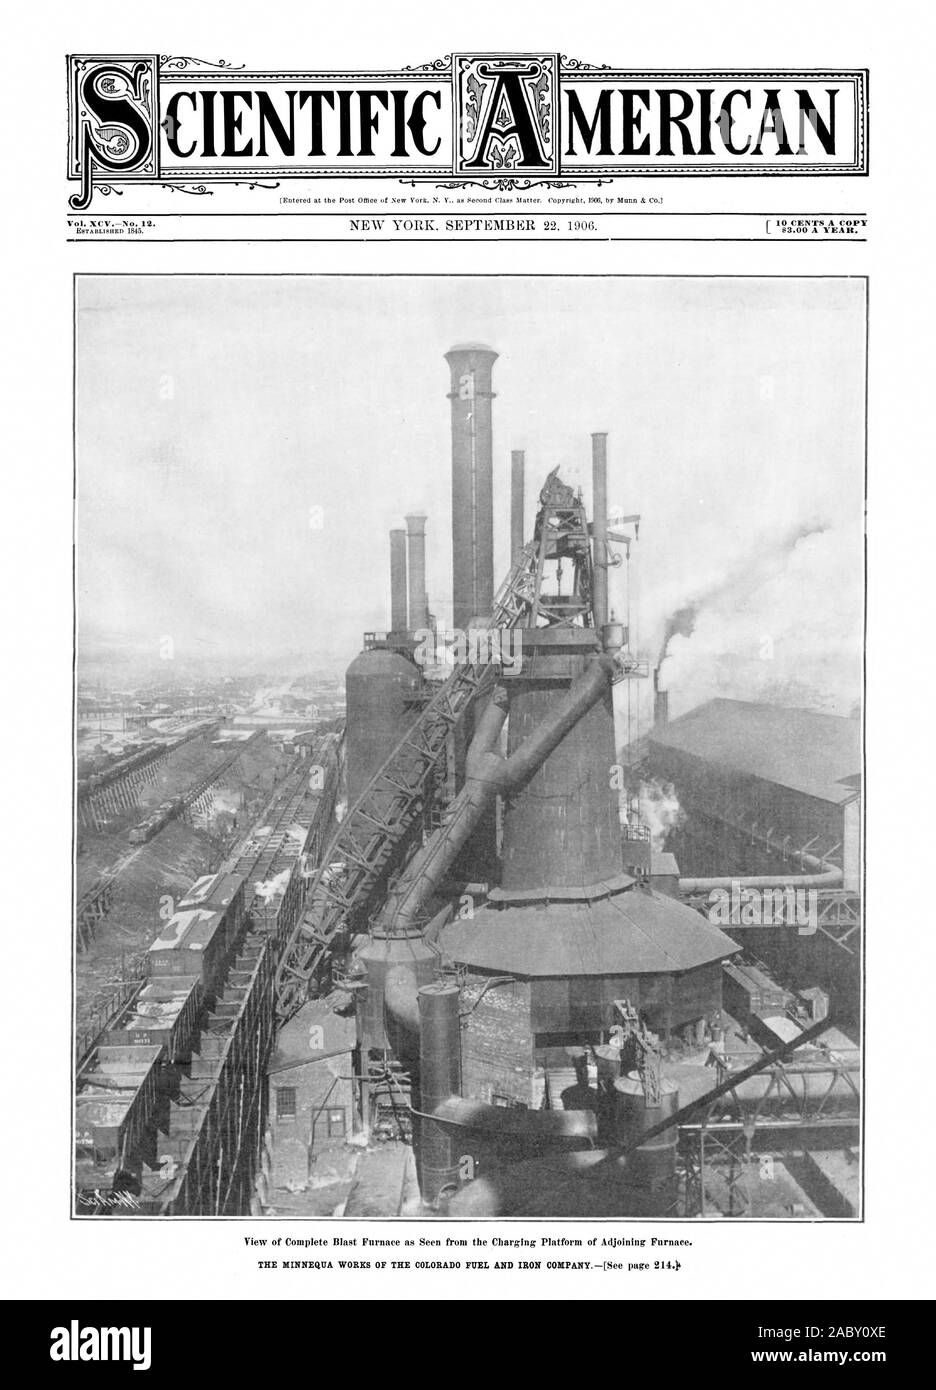 View of Complete Blast Furnace as Seen from the Charging Platform of Adjoining Furnace. CIENTIFIC MERICA, scientific american, 1906-09-22 Stock Photo